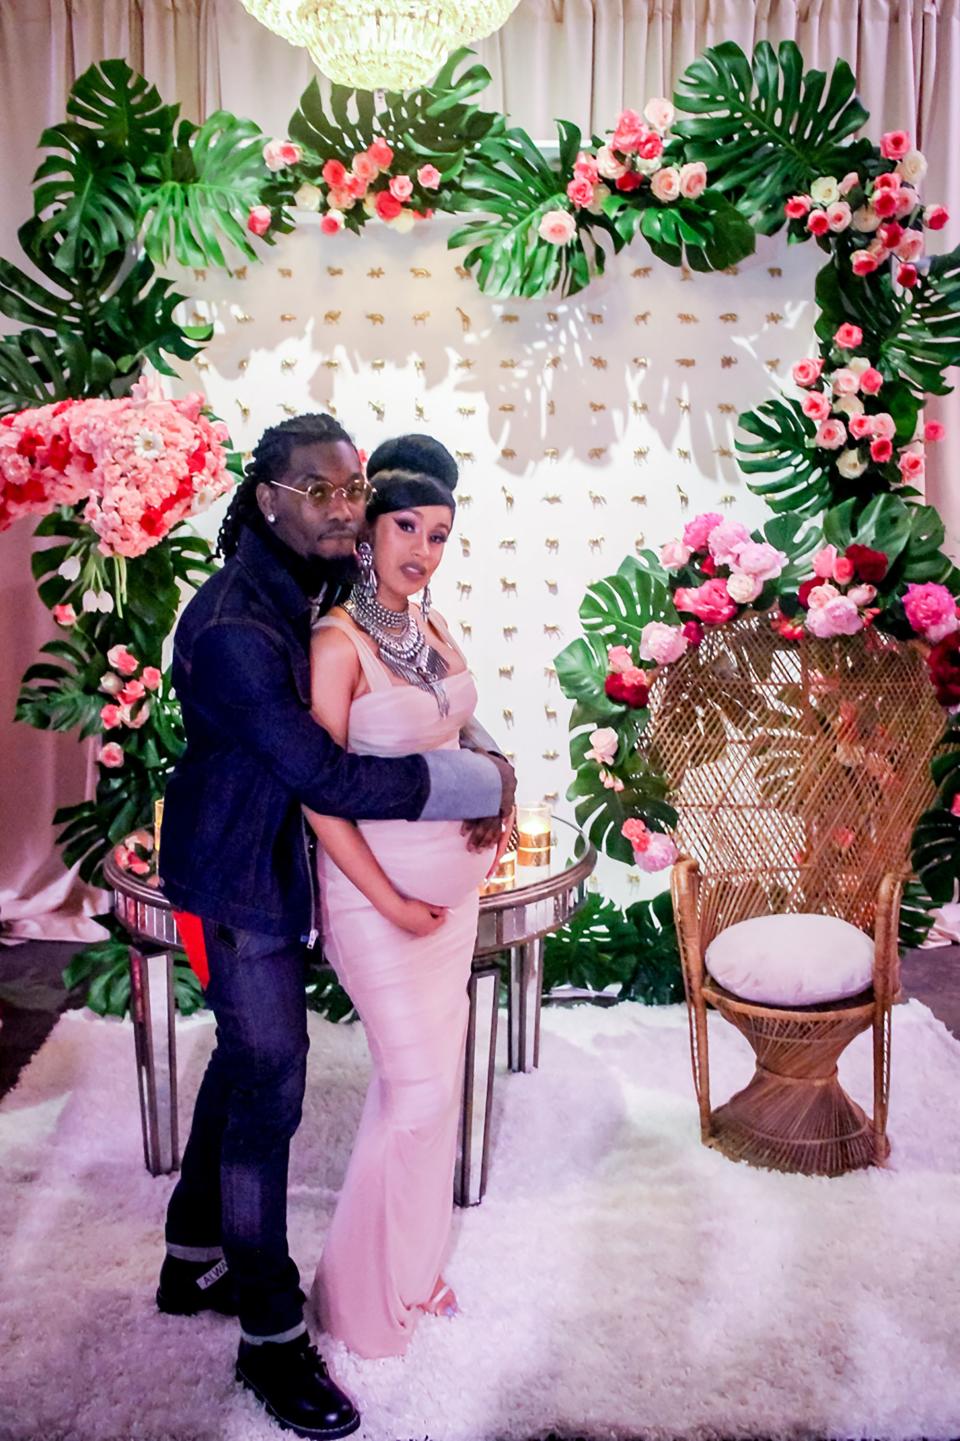 Cardi B’s lavish baby shower included 26,000 flowers, a five-layer cake, and a custom bodega.